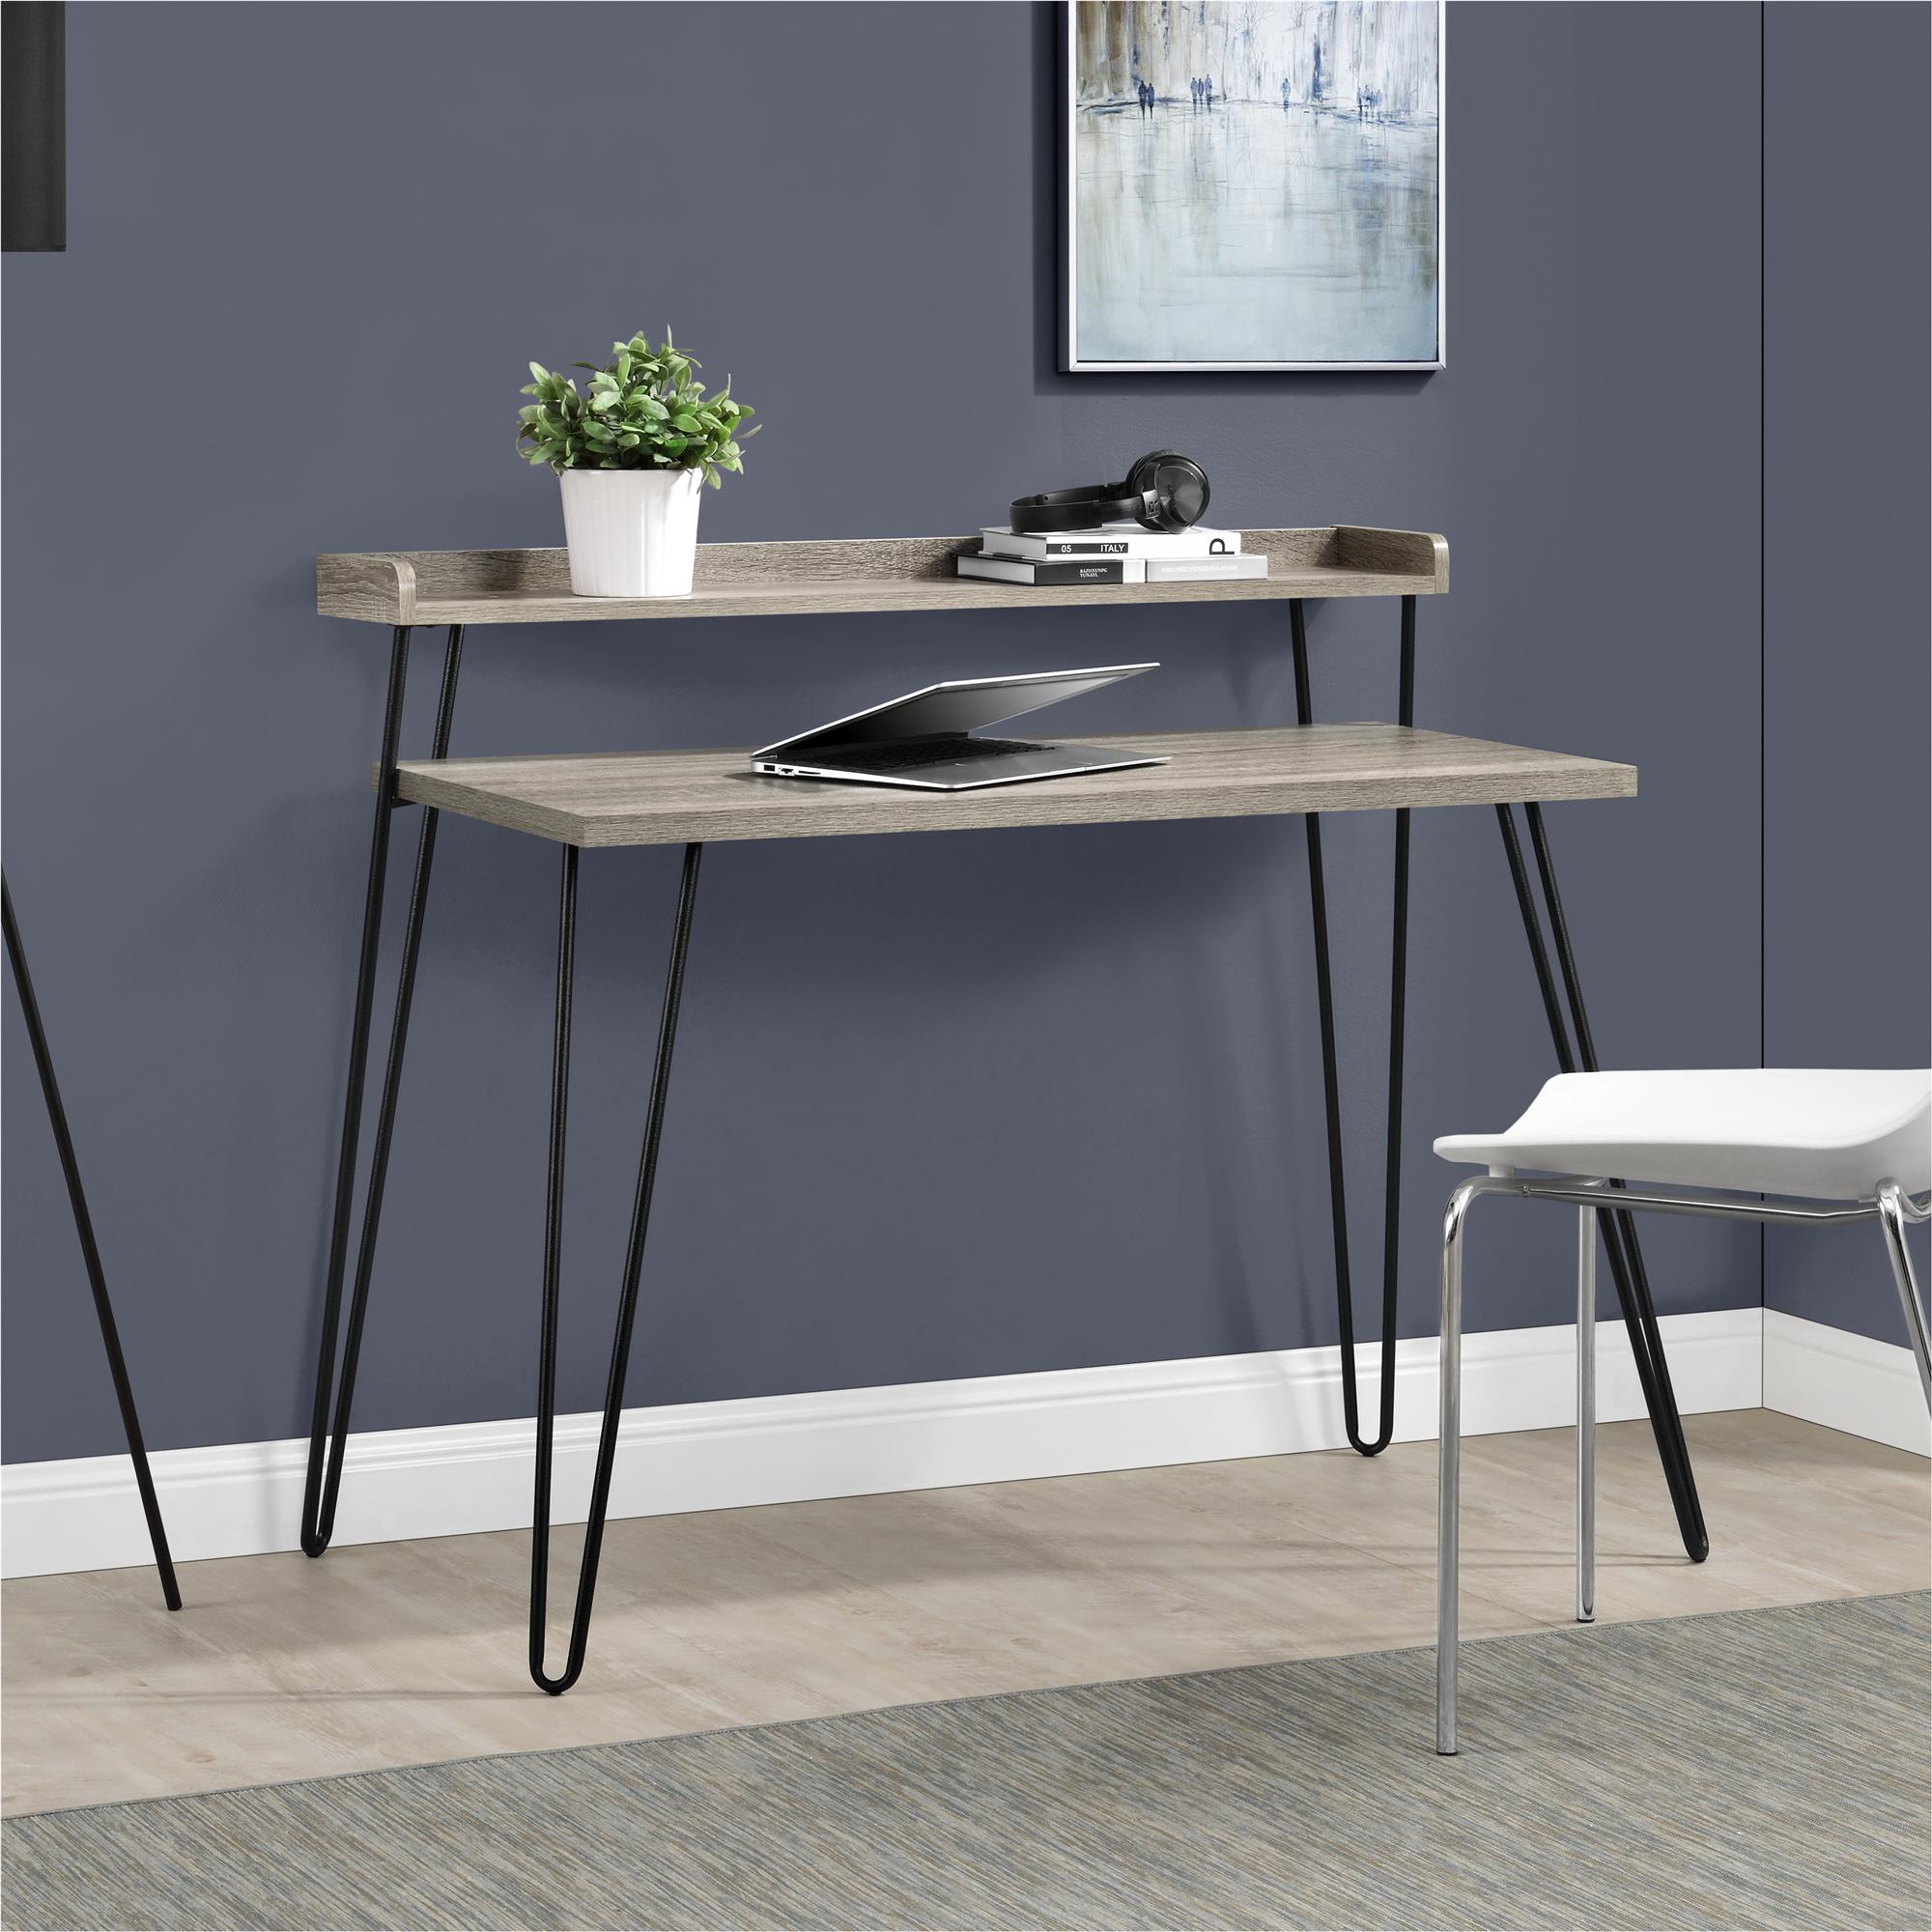 Mainstays Griffin Retro Computer Desk with Riser, Distressed Gray Oak - image 2 of 8